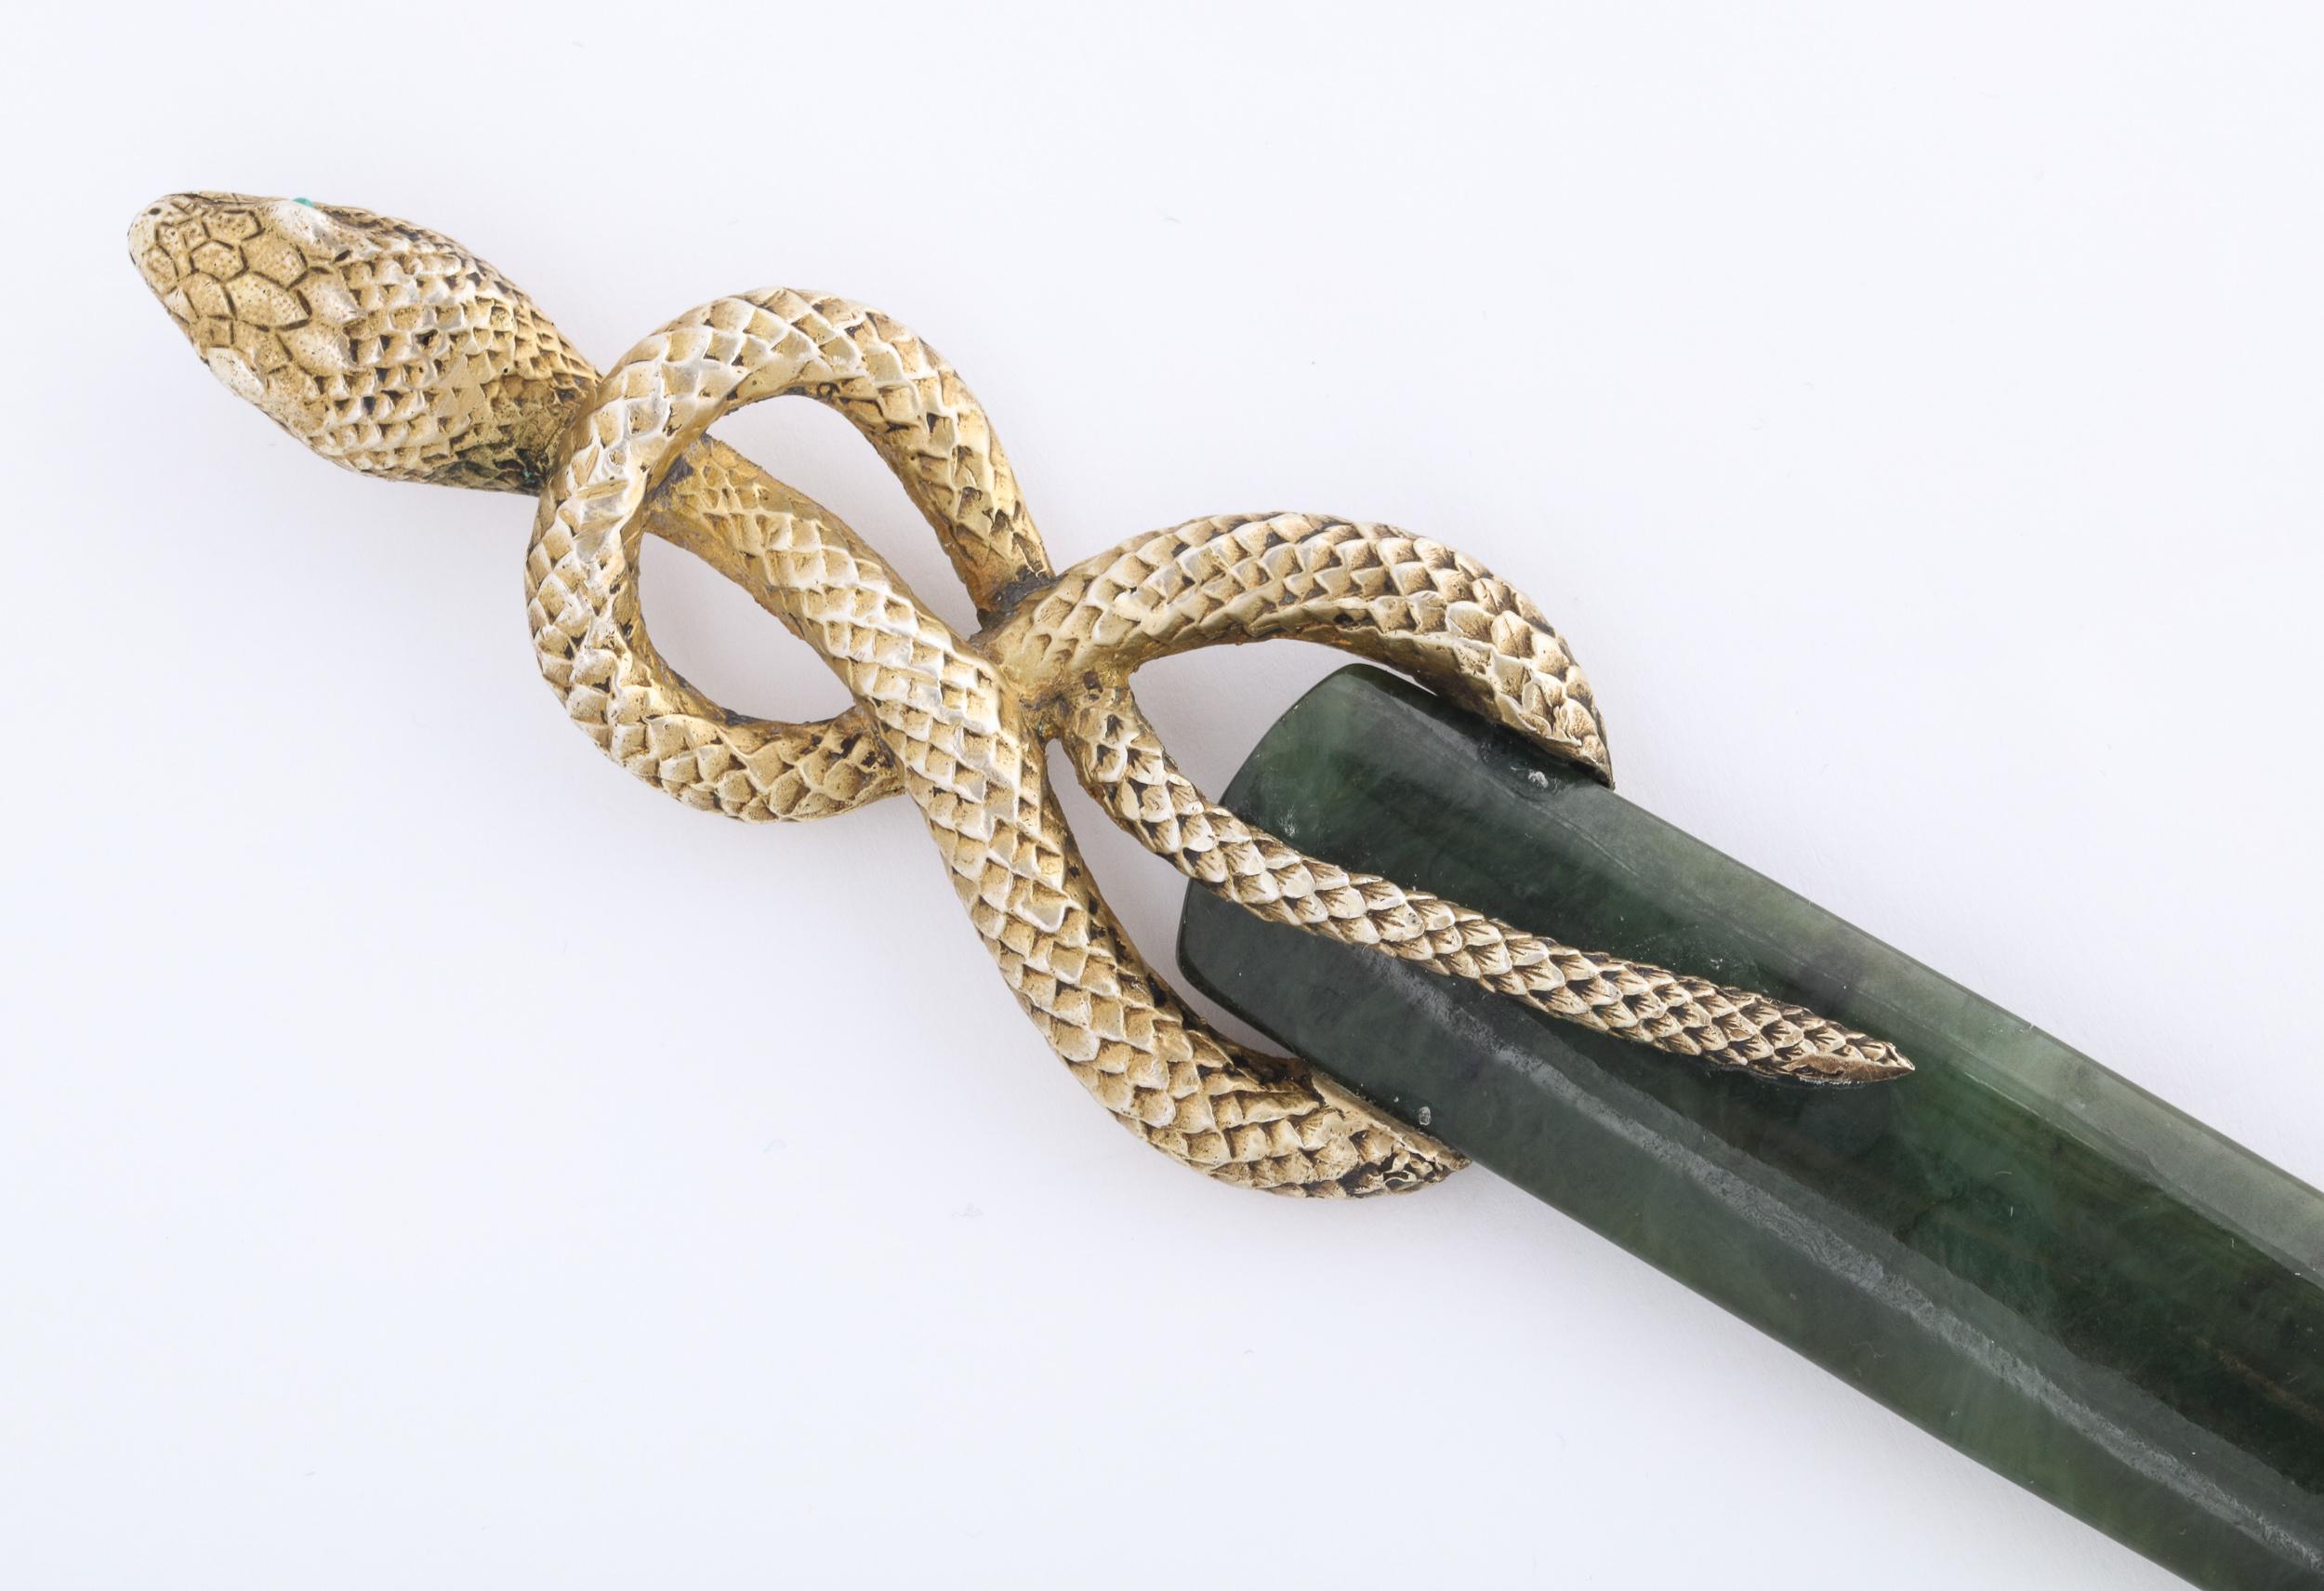 Antique Russian silver-gilt mounted snake handled nephrite jade letter opener.

Marked with silver head and 88 silver mark.

Good condition. Good quality.

Measures: 9